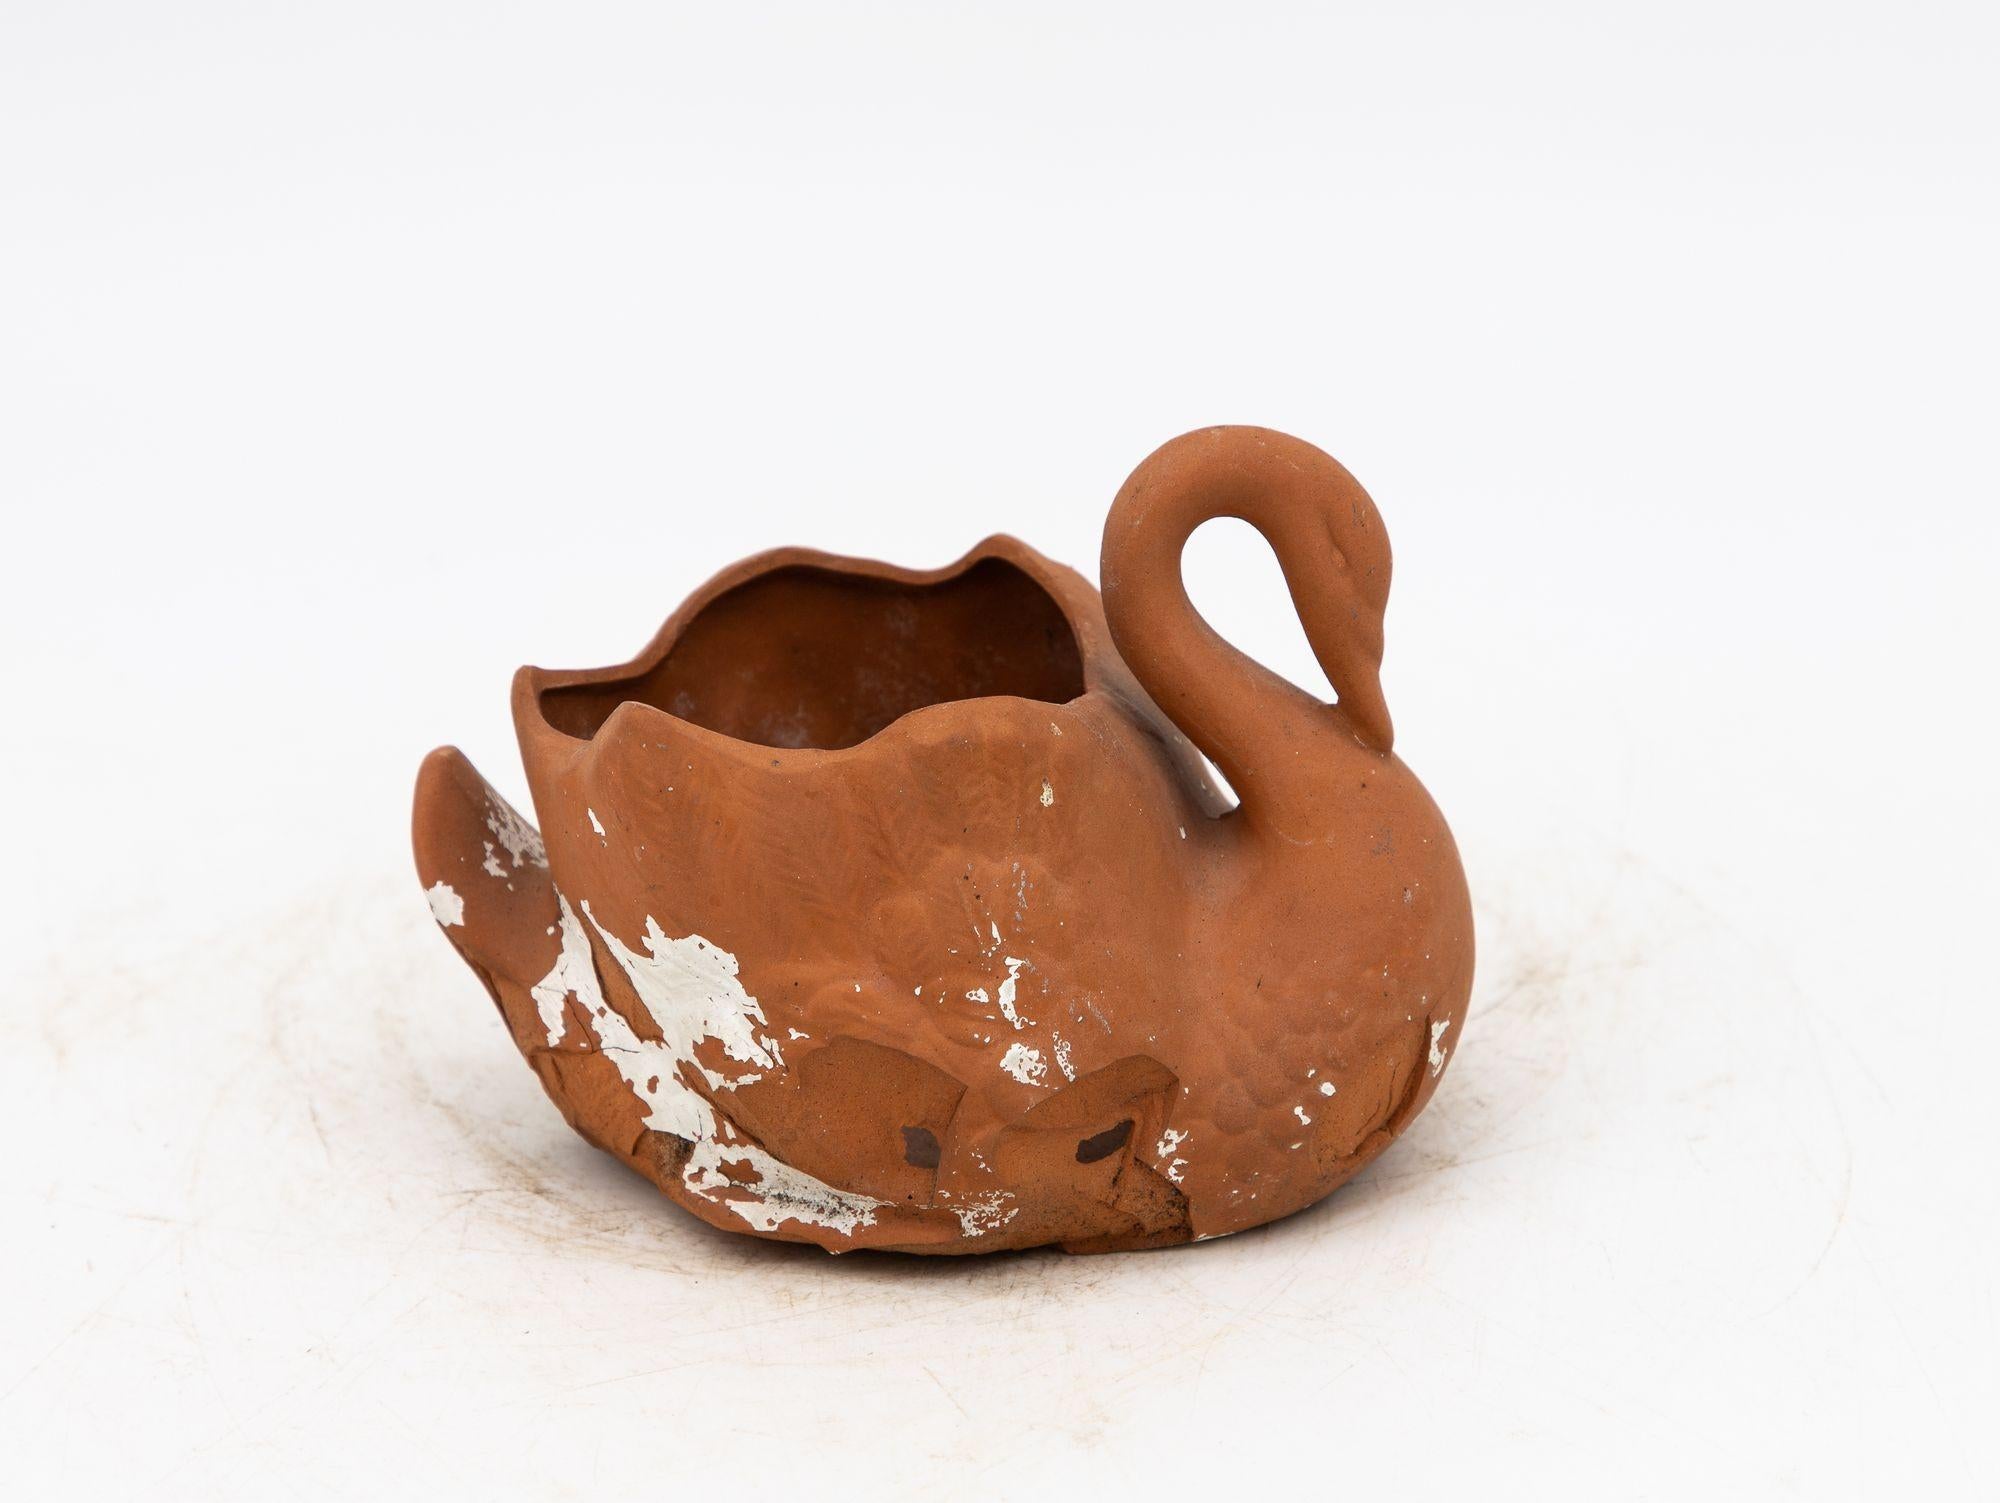 Small Swan Terracotta Vase or Planter, English Late 20th C In Fair Condition For Sale In South Salem, NY